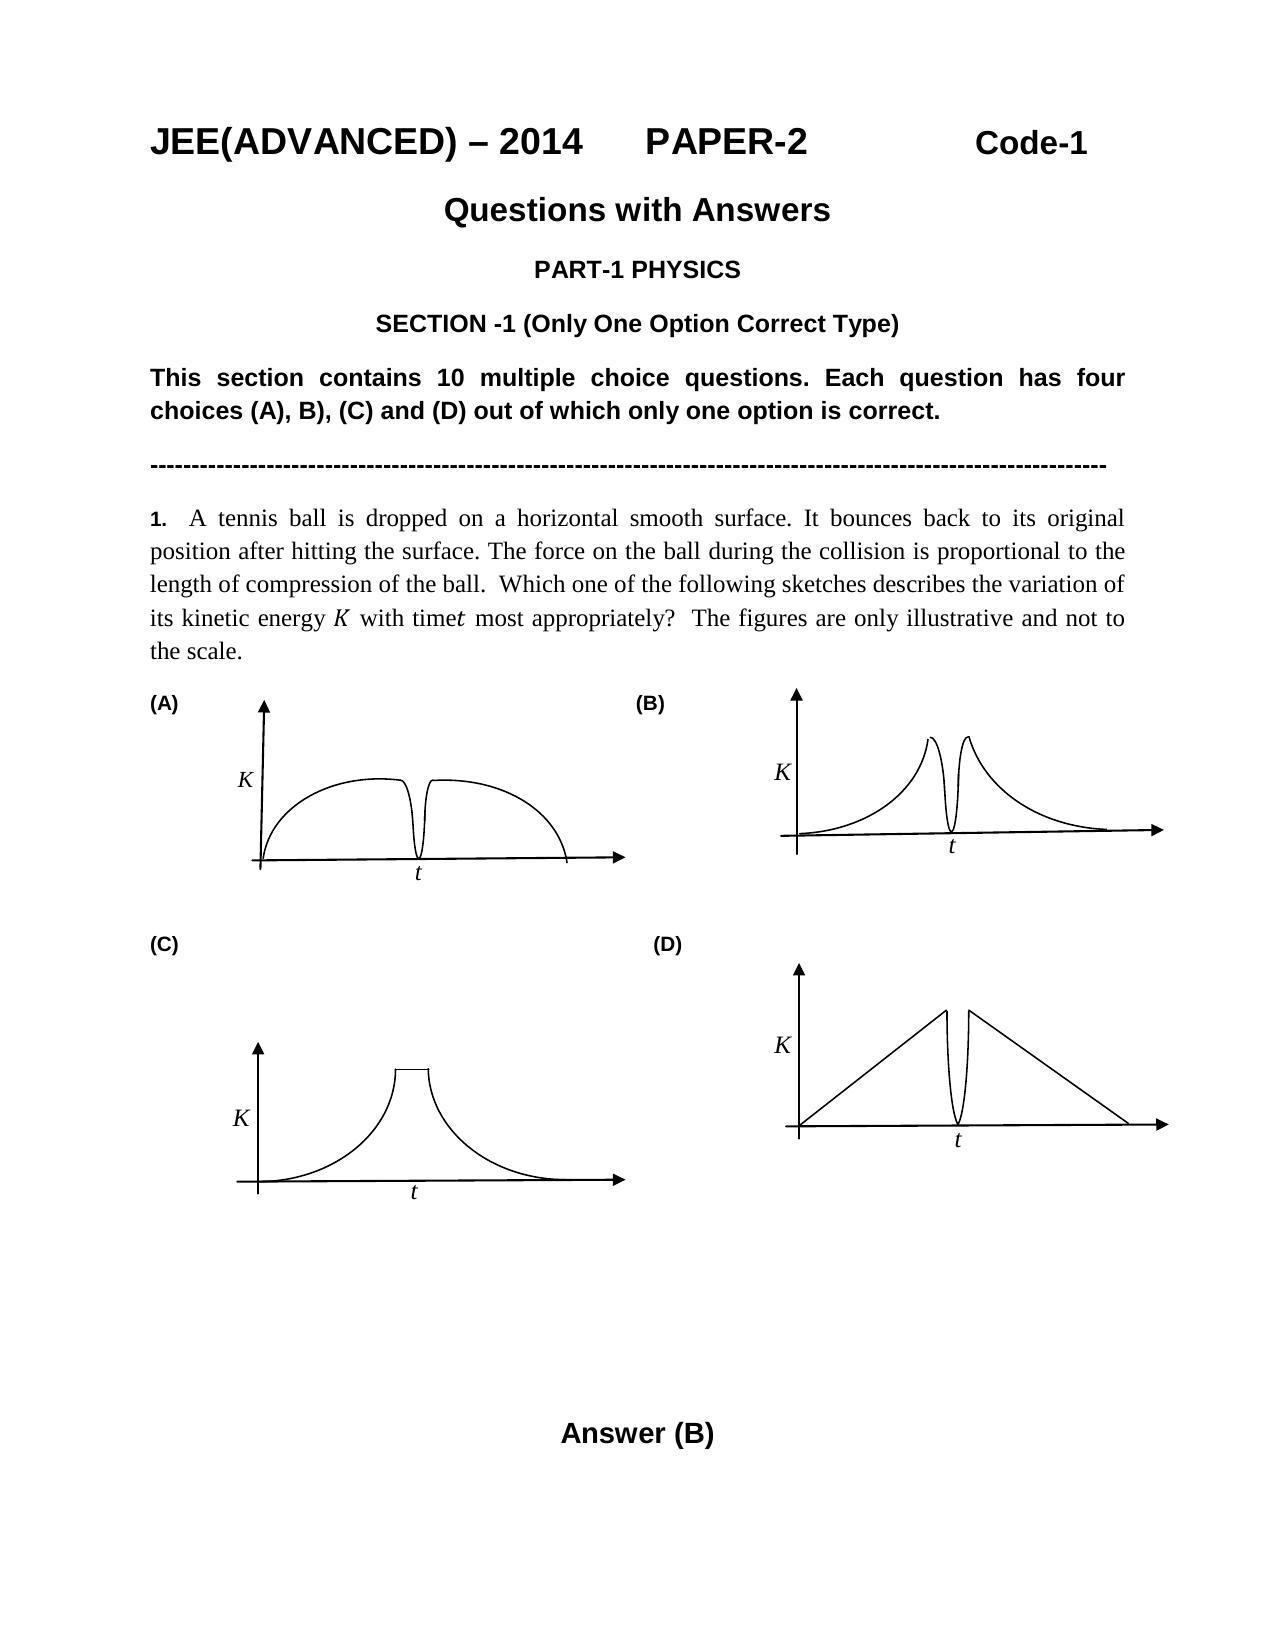 JEE (Advanced) 2014 Paper II Question Paper - Page 1